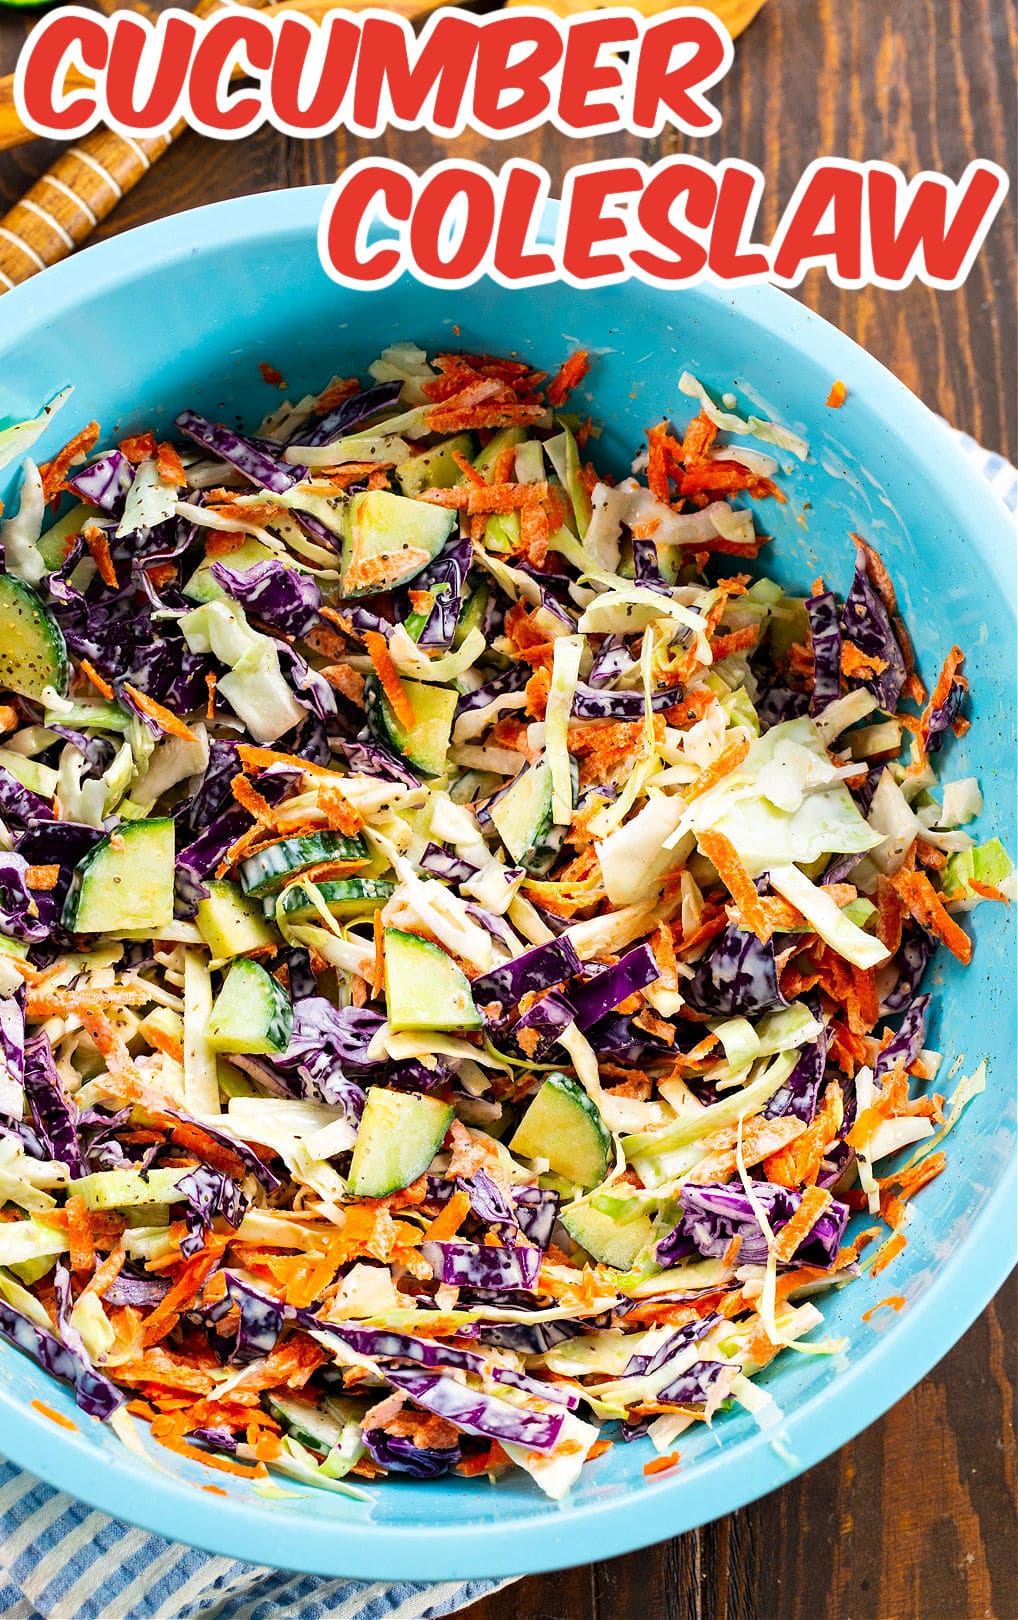 Coleslaw with cucumbers in large blue bowl.